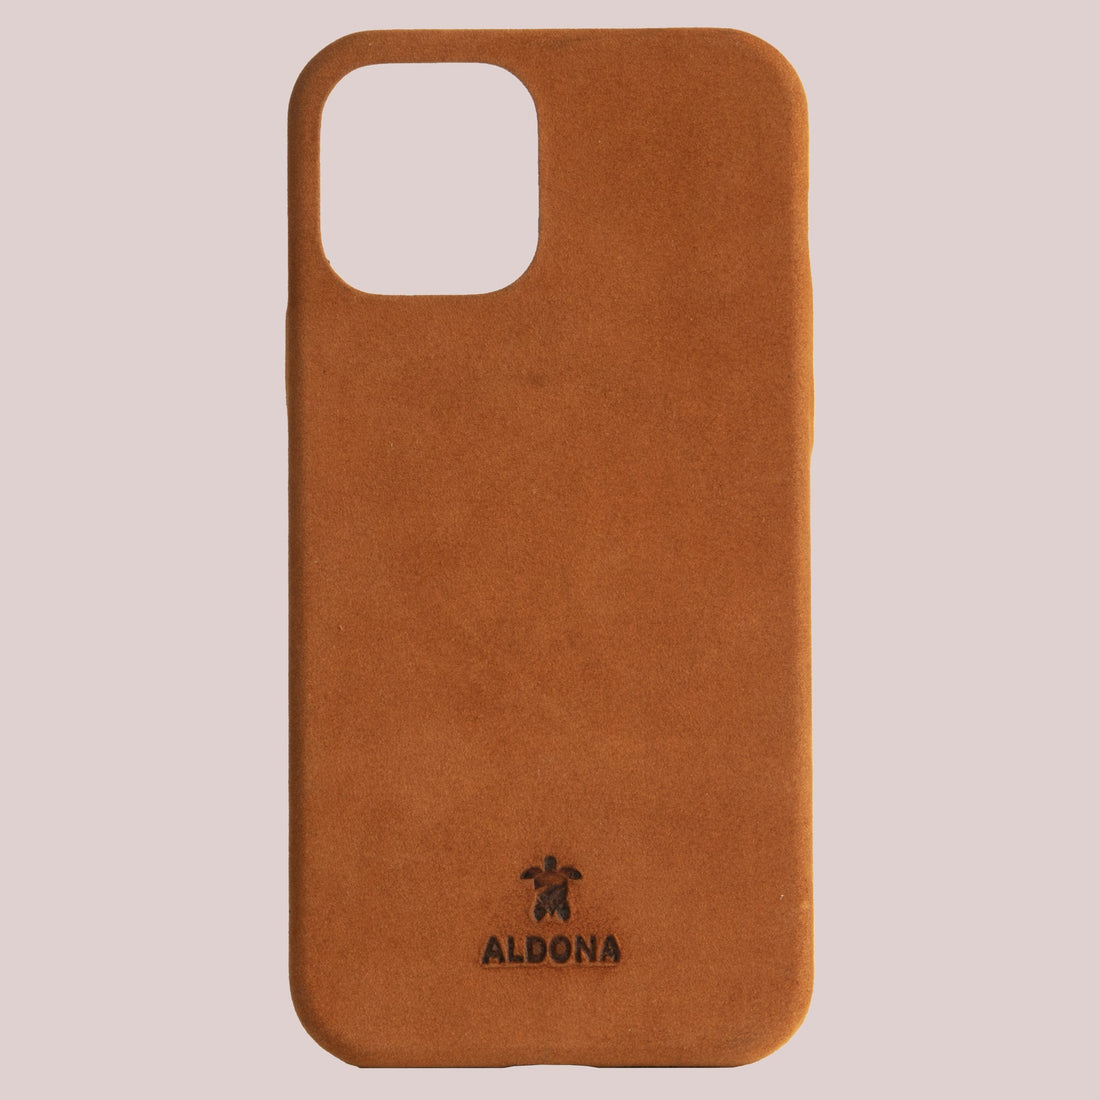 Kalon Case for iPhone 13 series with MagSafe Compatibility - Vintage Tan